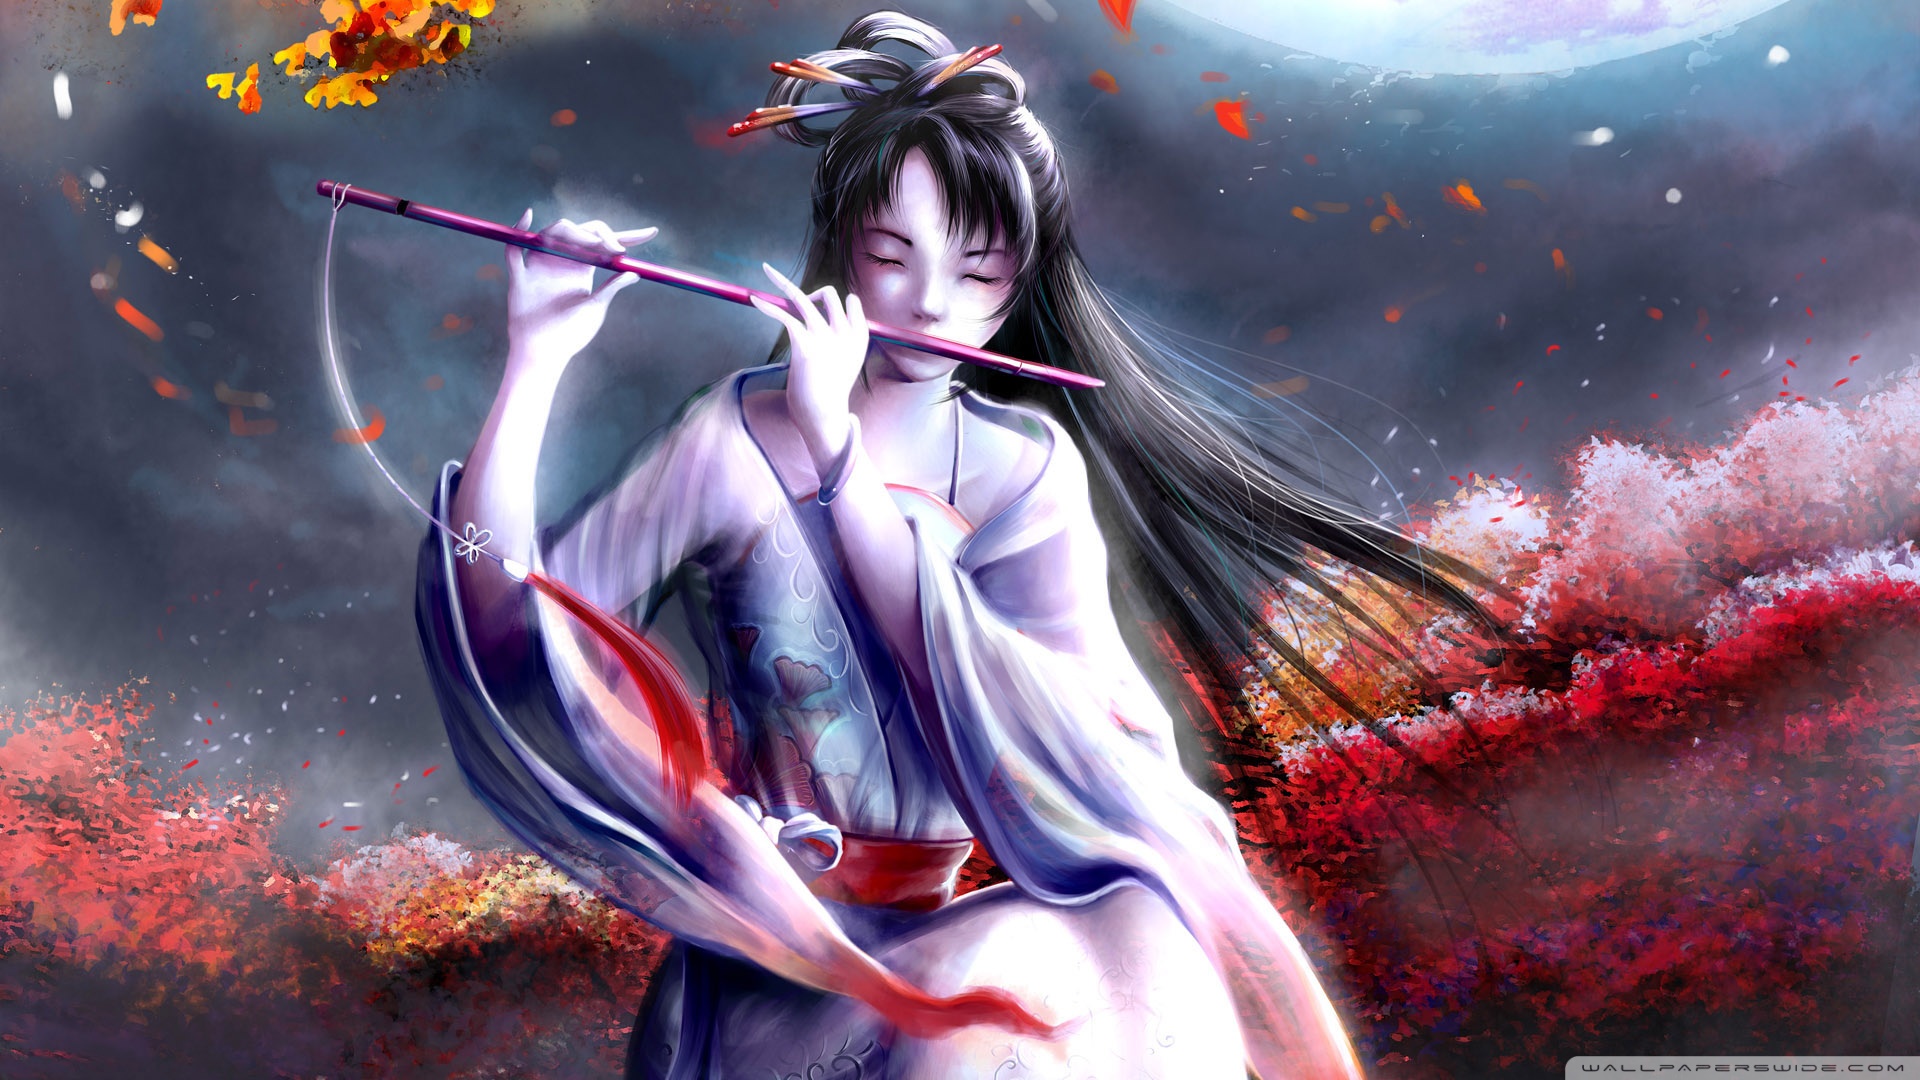 Painting Of Girl Playing Flute - HD Wallpaper 